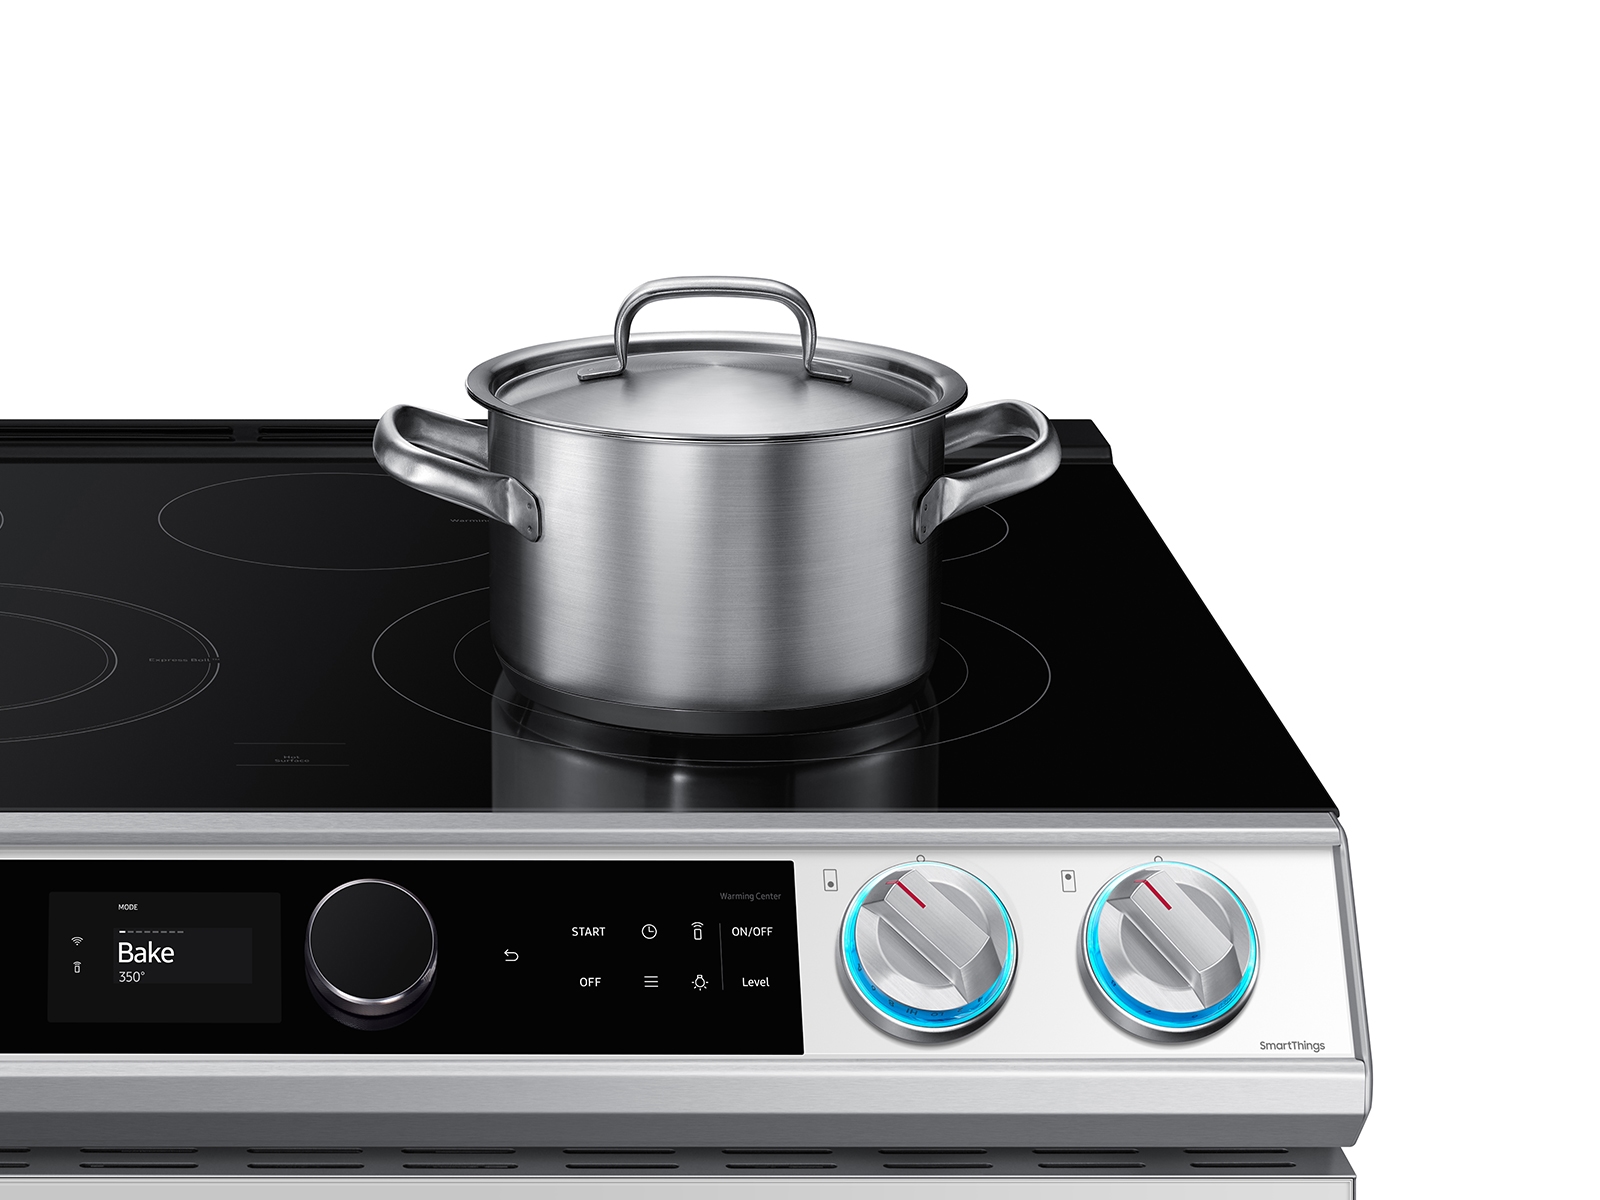 Thumbnail image of Bespoke Smart Slide-in Electric Range 6.3 cu. ft. with Smart Dial &amp; Air Fry in White Glass